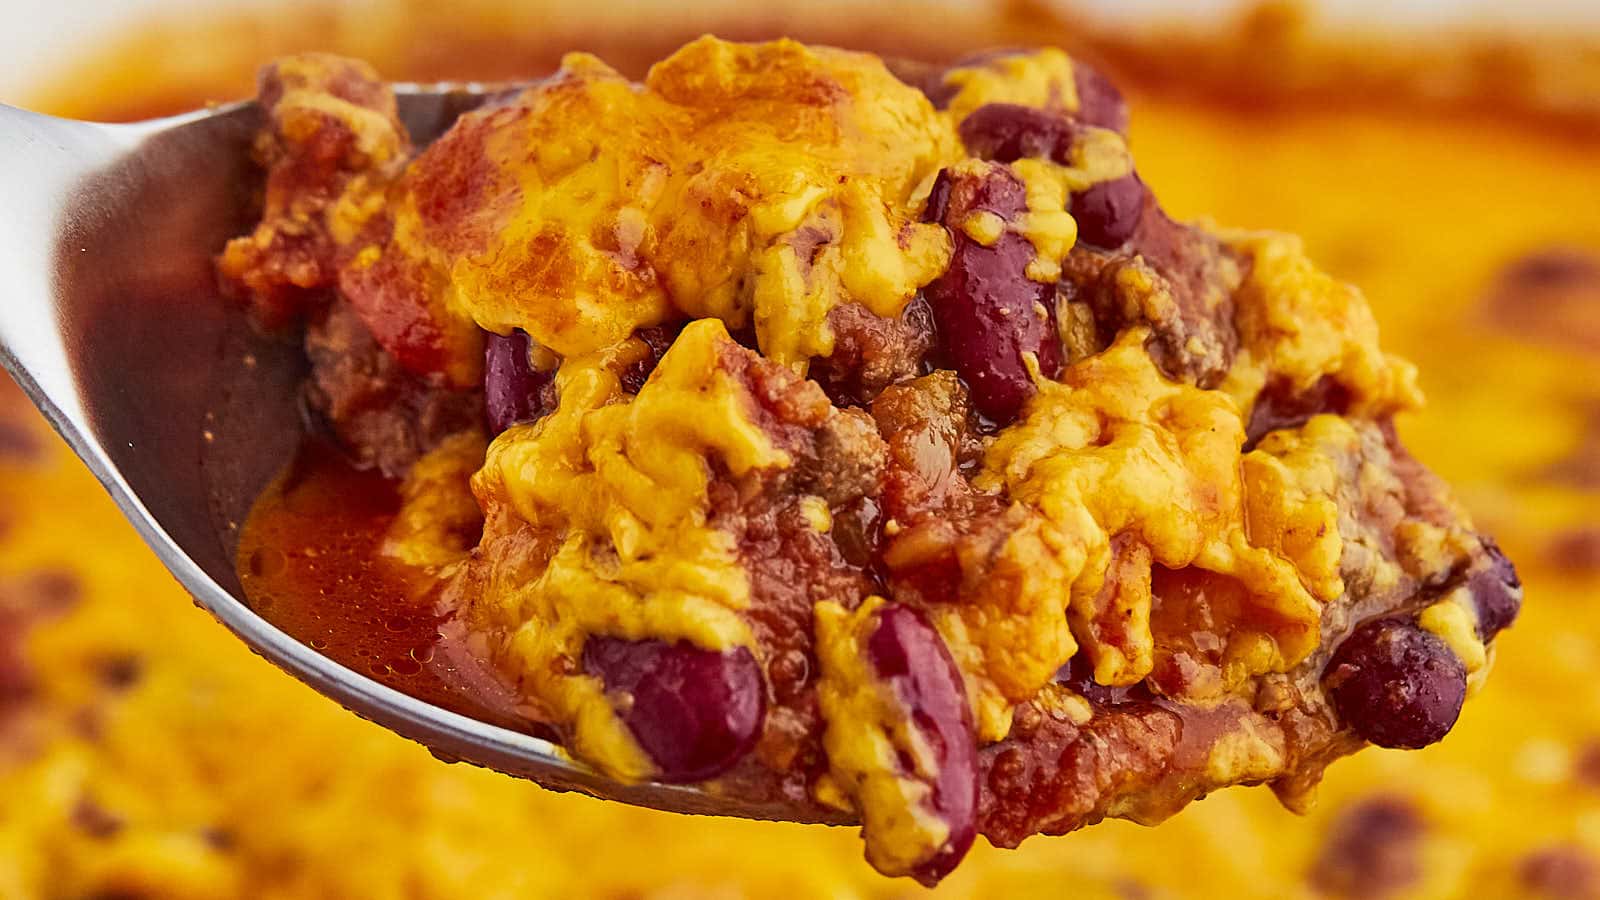 <p>This quick and easy <strong>Cheesy Beef and Bean Casserole</strong> is a delicious recipe the whole family will love. Tender beef and beans are baked in a delicious tomato-based sauce and finished with a layer of gooey melted Cheddar cheese.</p><p>Get The Recipe: <strong><a href="https://cheerfulcook.com/cheesy-beef-and-bean-casserole/" rel="noreferrer noopener">Beef And Bean Casserole</a></strong></p>